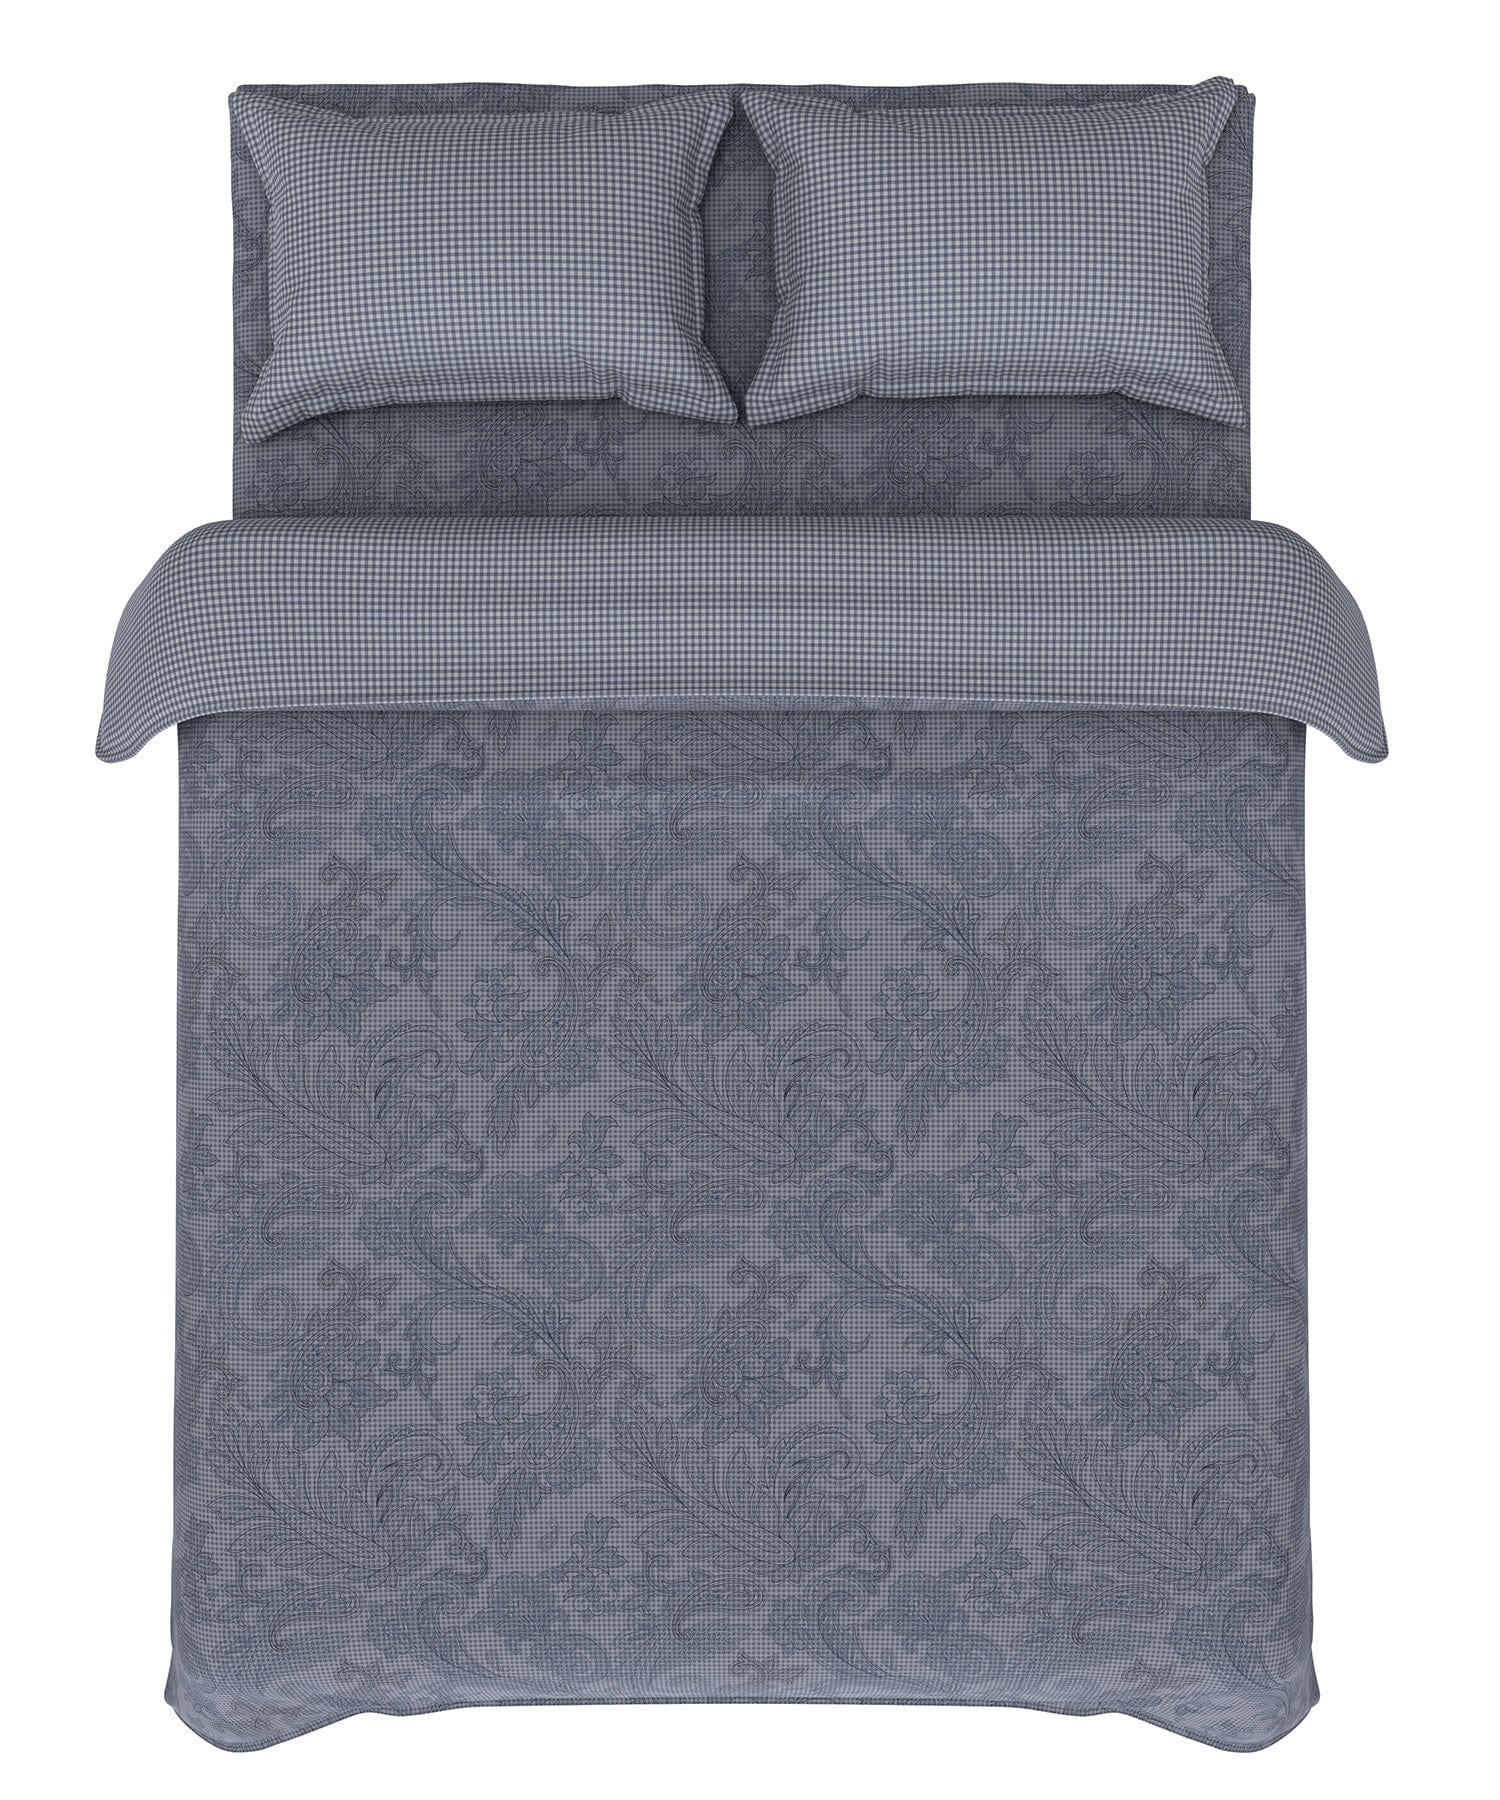 Everyday Bed In A Bag Set,144 TC, 100% Cotton,  Corisca Blue